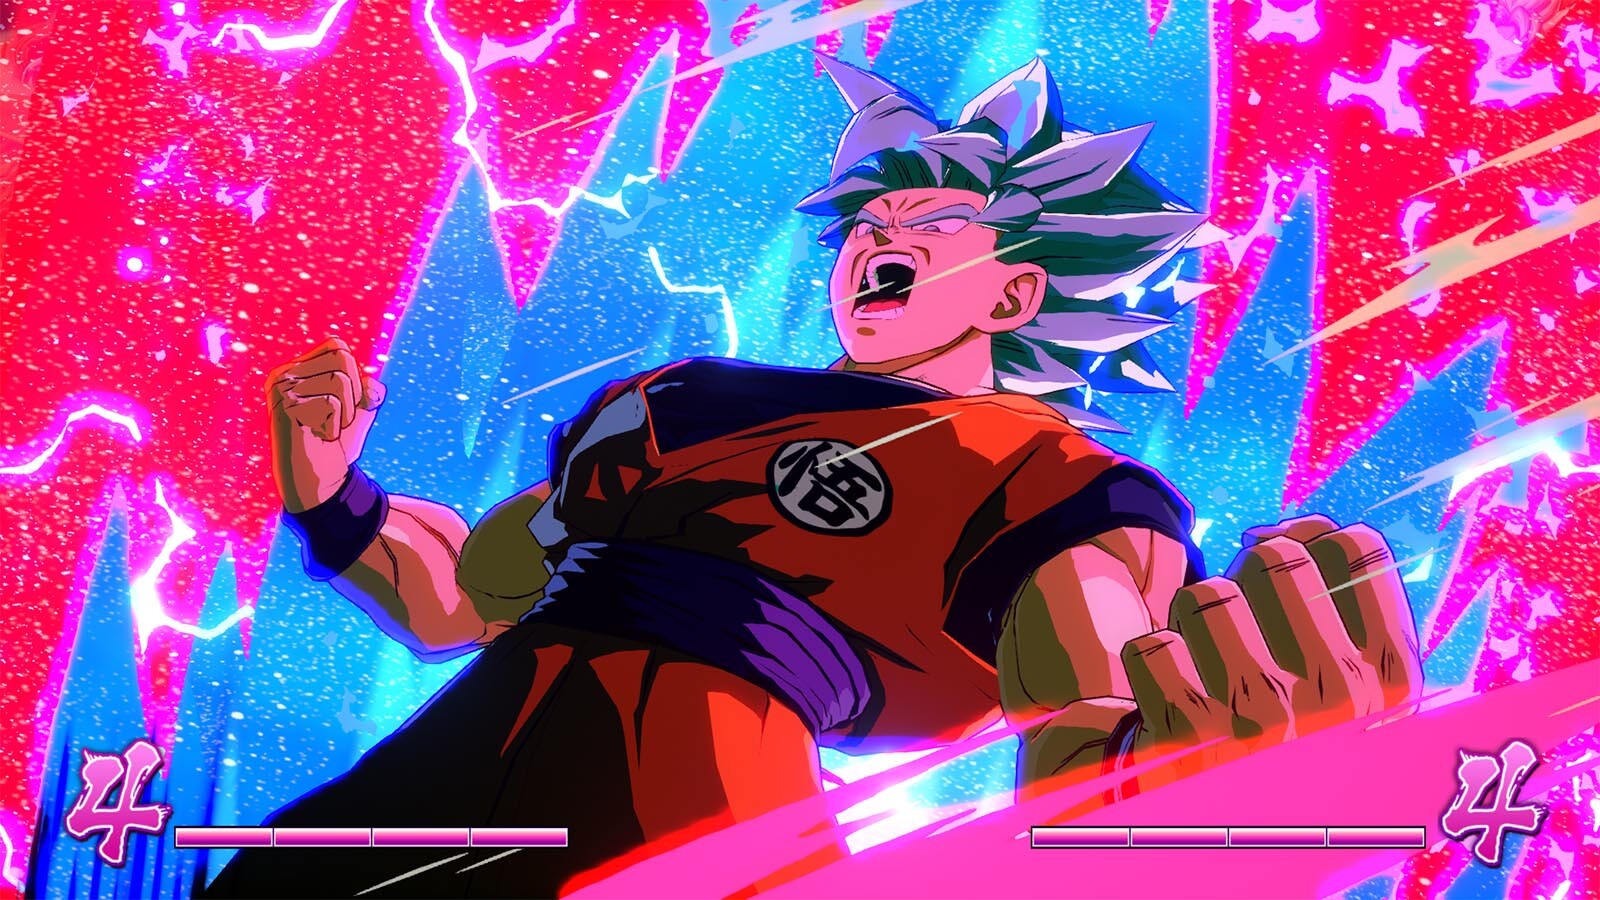 DRAGON BALL FighterZ [Steam CD Key] for PC - Buy now